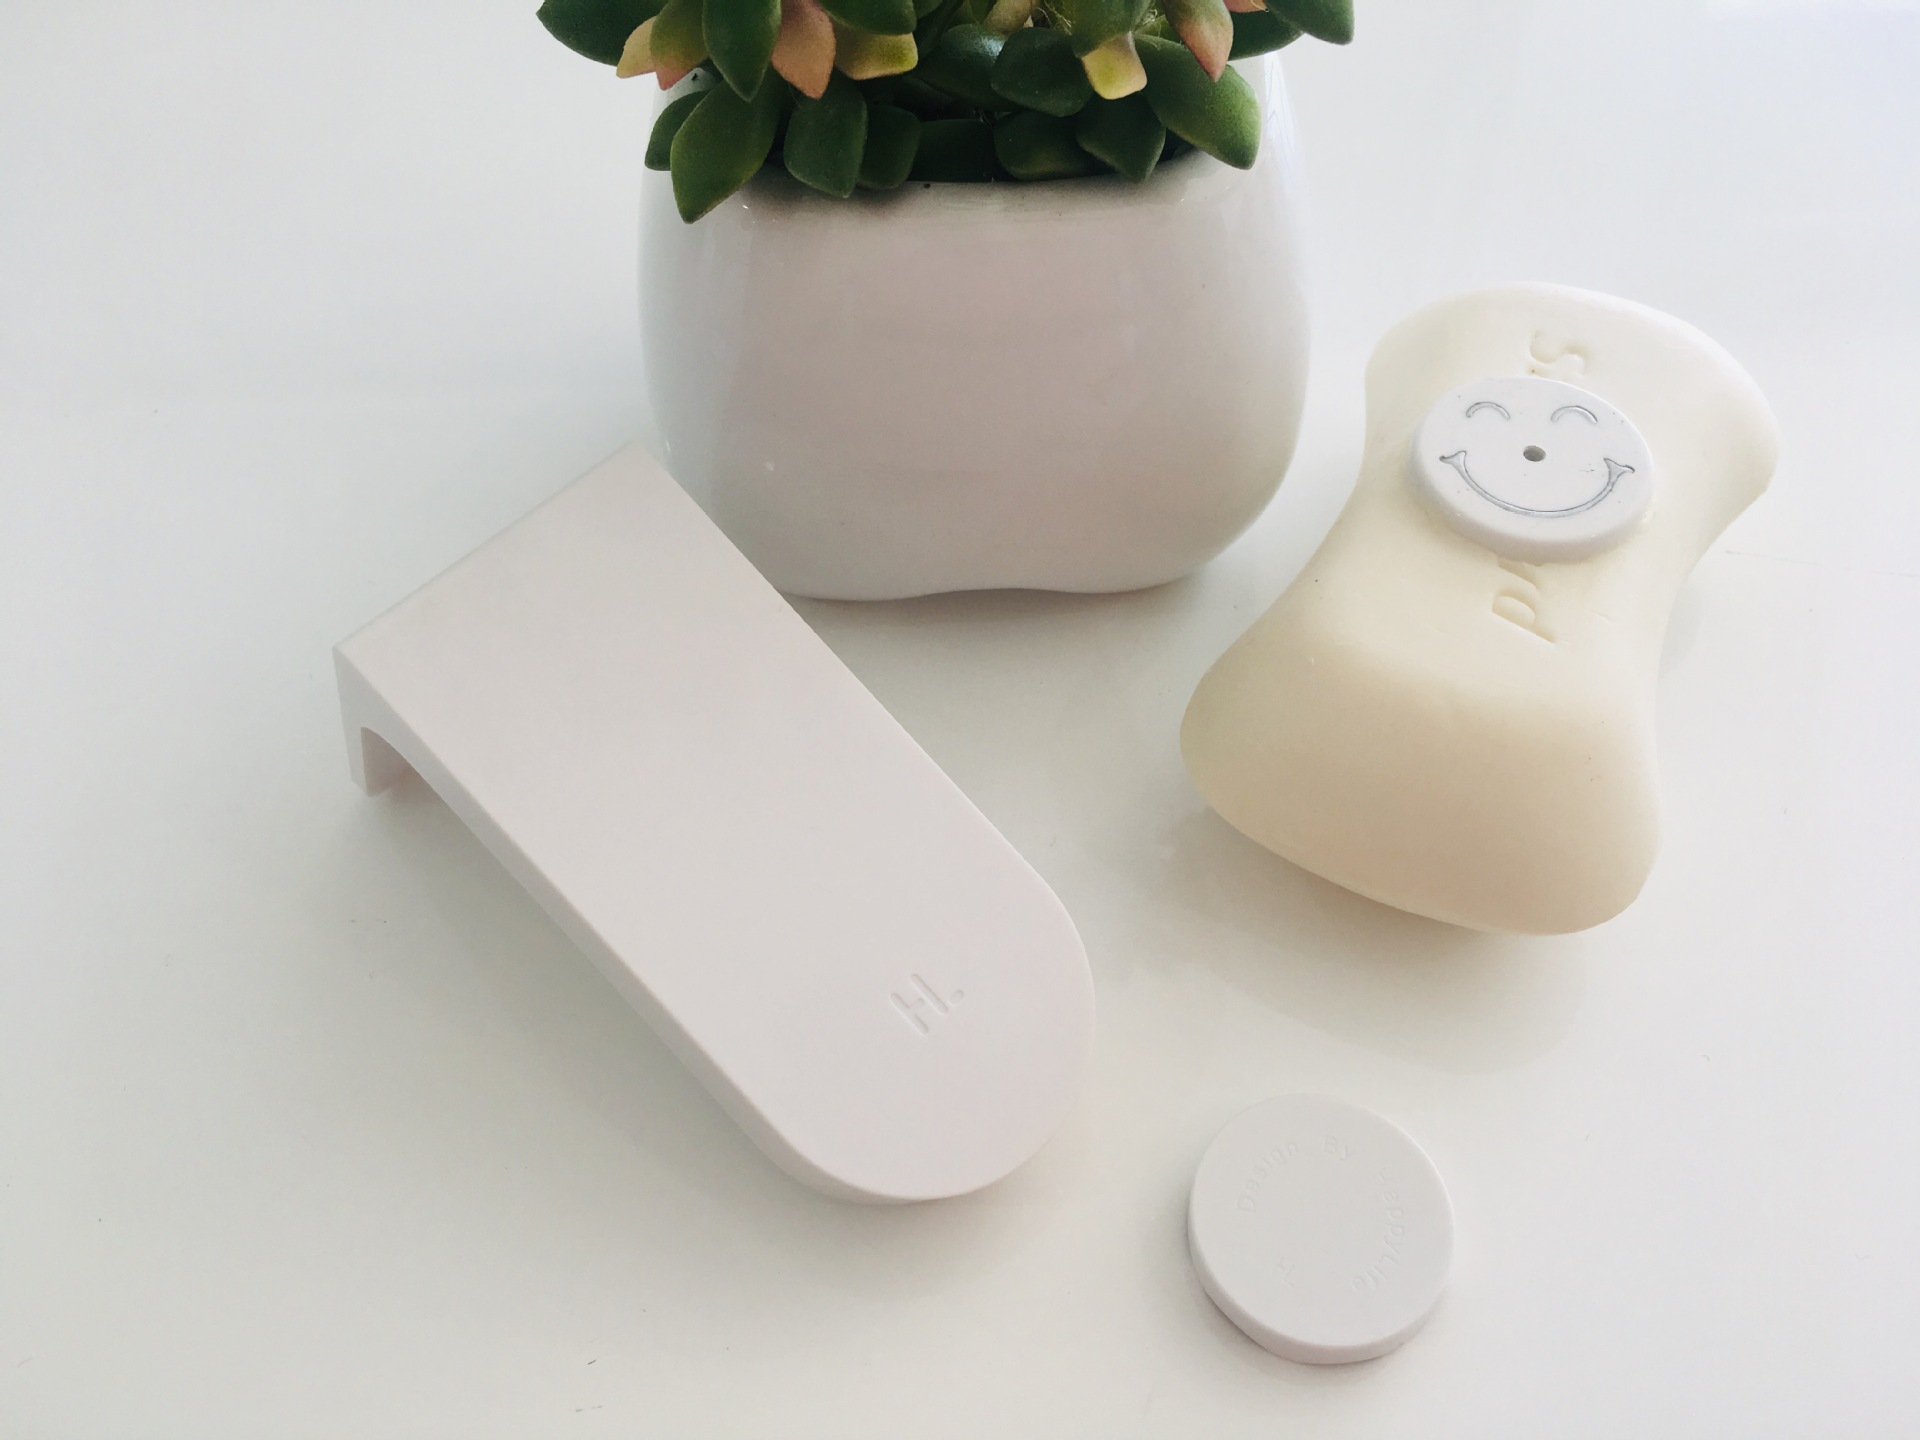 XIAOMI-Happy-Life-Household-Magnetic-Soap-Holder-Powerful-Suction-Cup-Wall-mounted-Soap-Box-Dishes-F-1381104